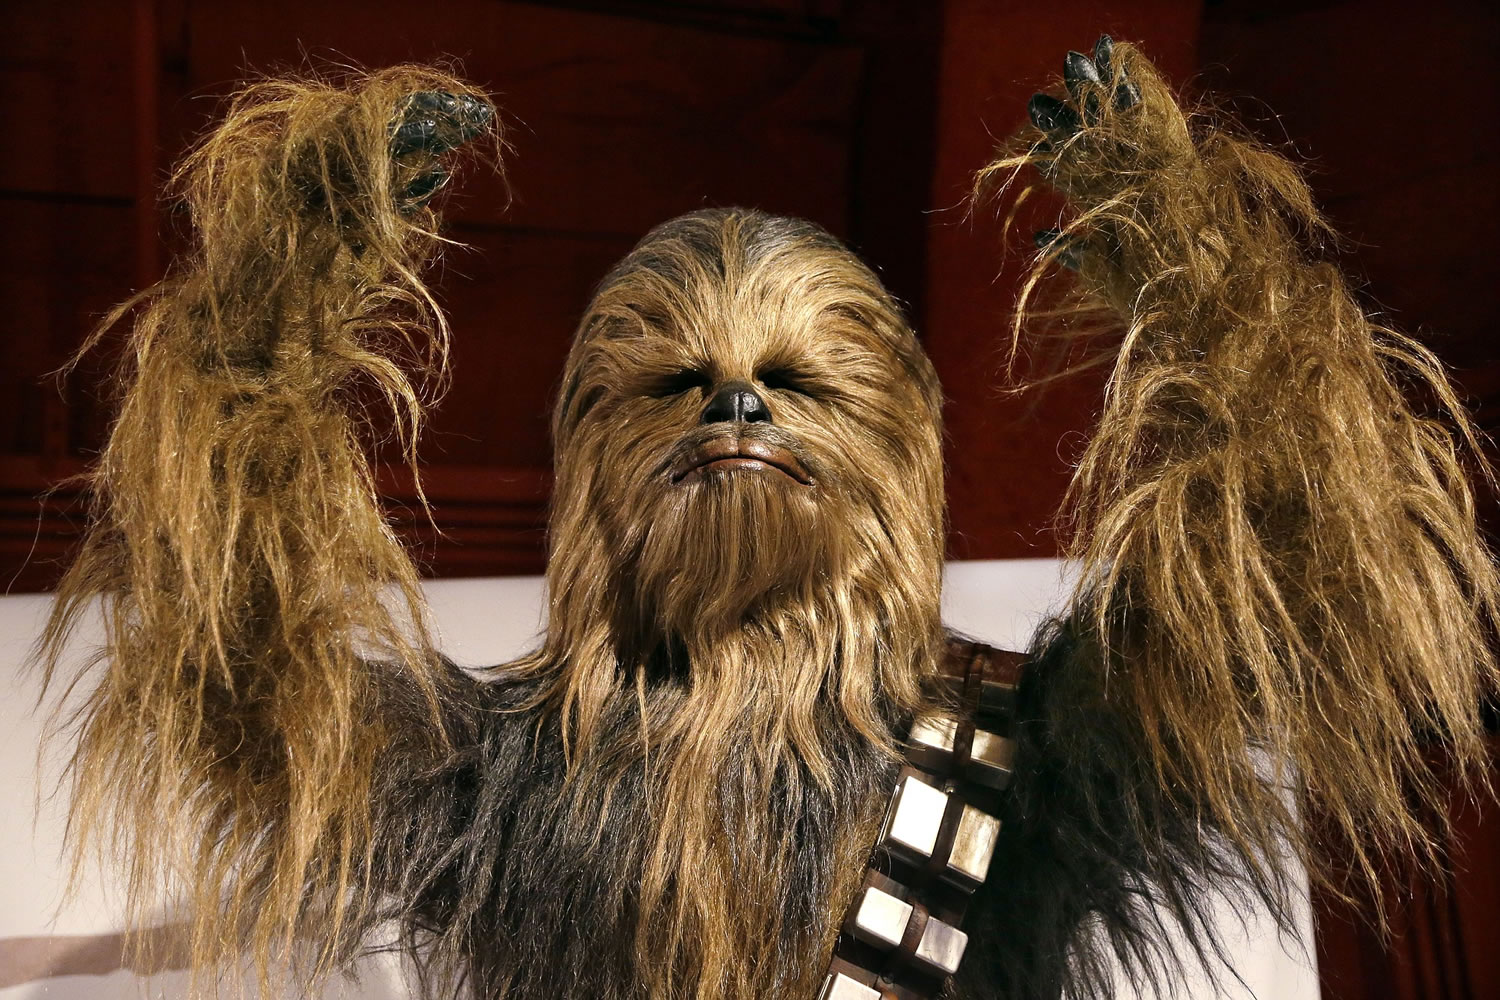 A yak hair and mohair costume of the Wookiee Chewbacca is displayed as part of an exhibit on the costumes of Star Wars at Seattle's EMP Museum.